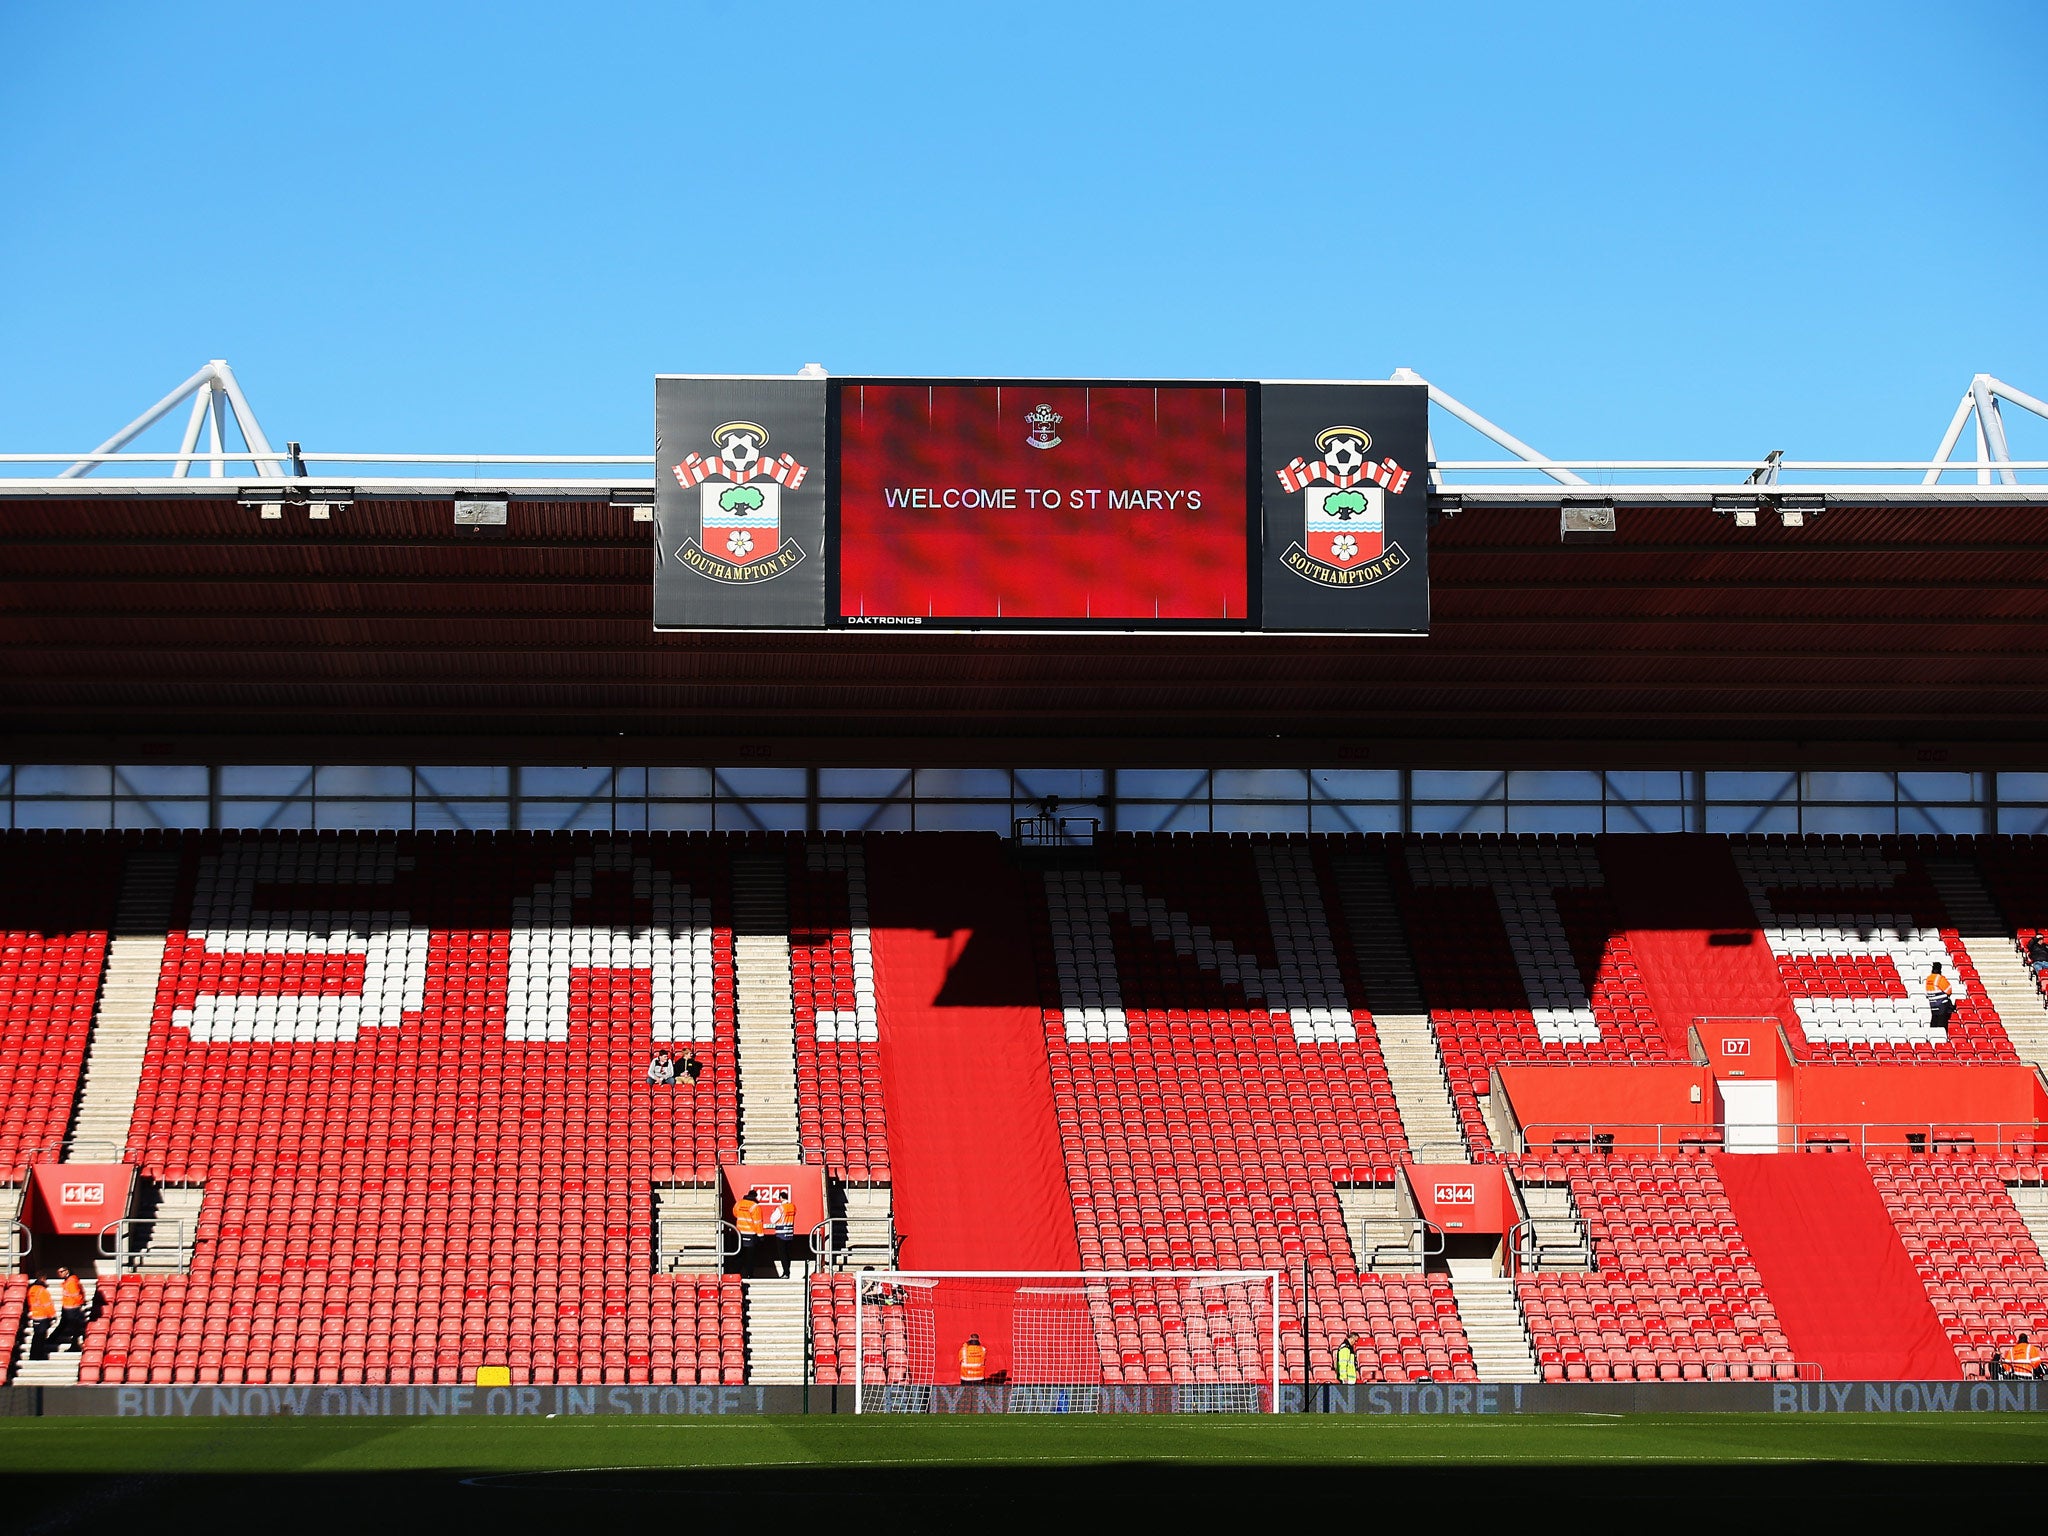 A view of Southampton's St Mary's Stadium